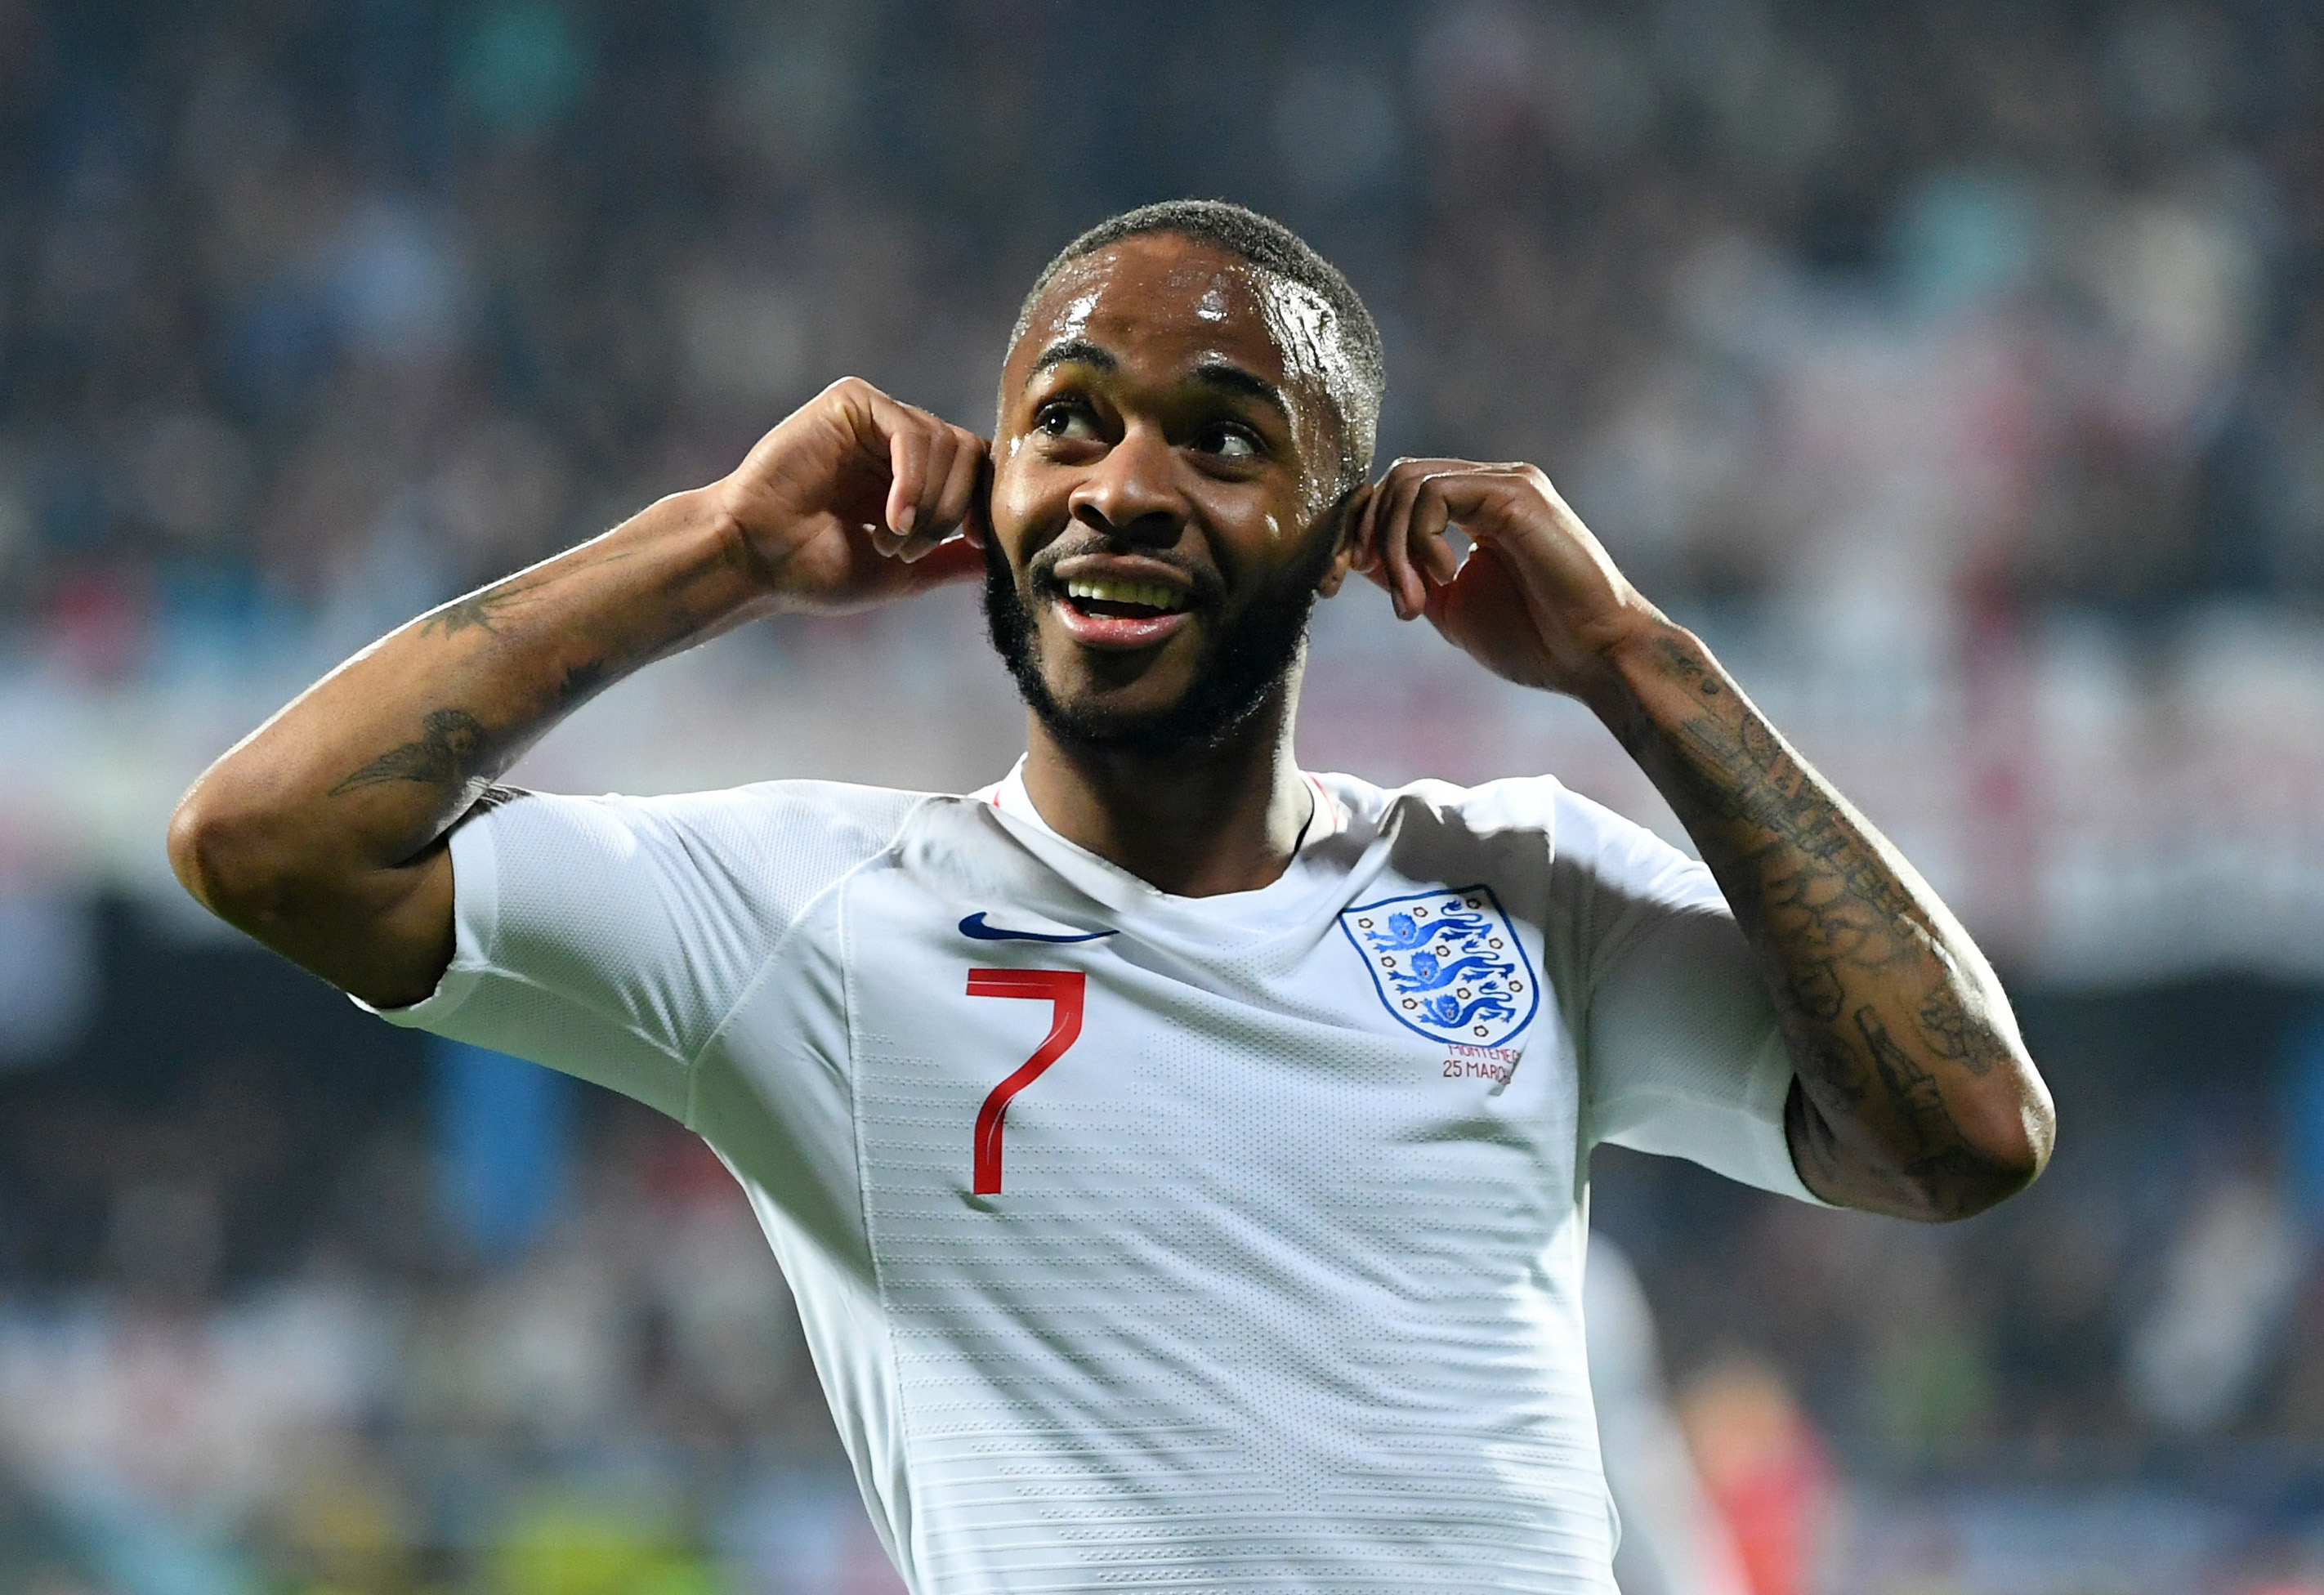 Raheem Sterling reacts to being racially abused in Montenegro back in March